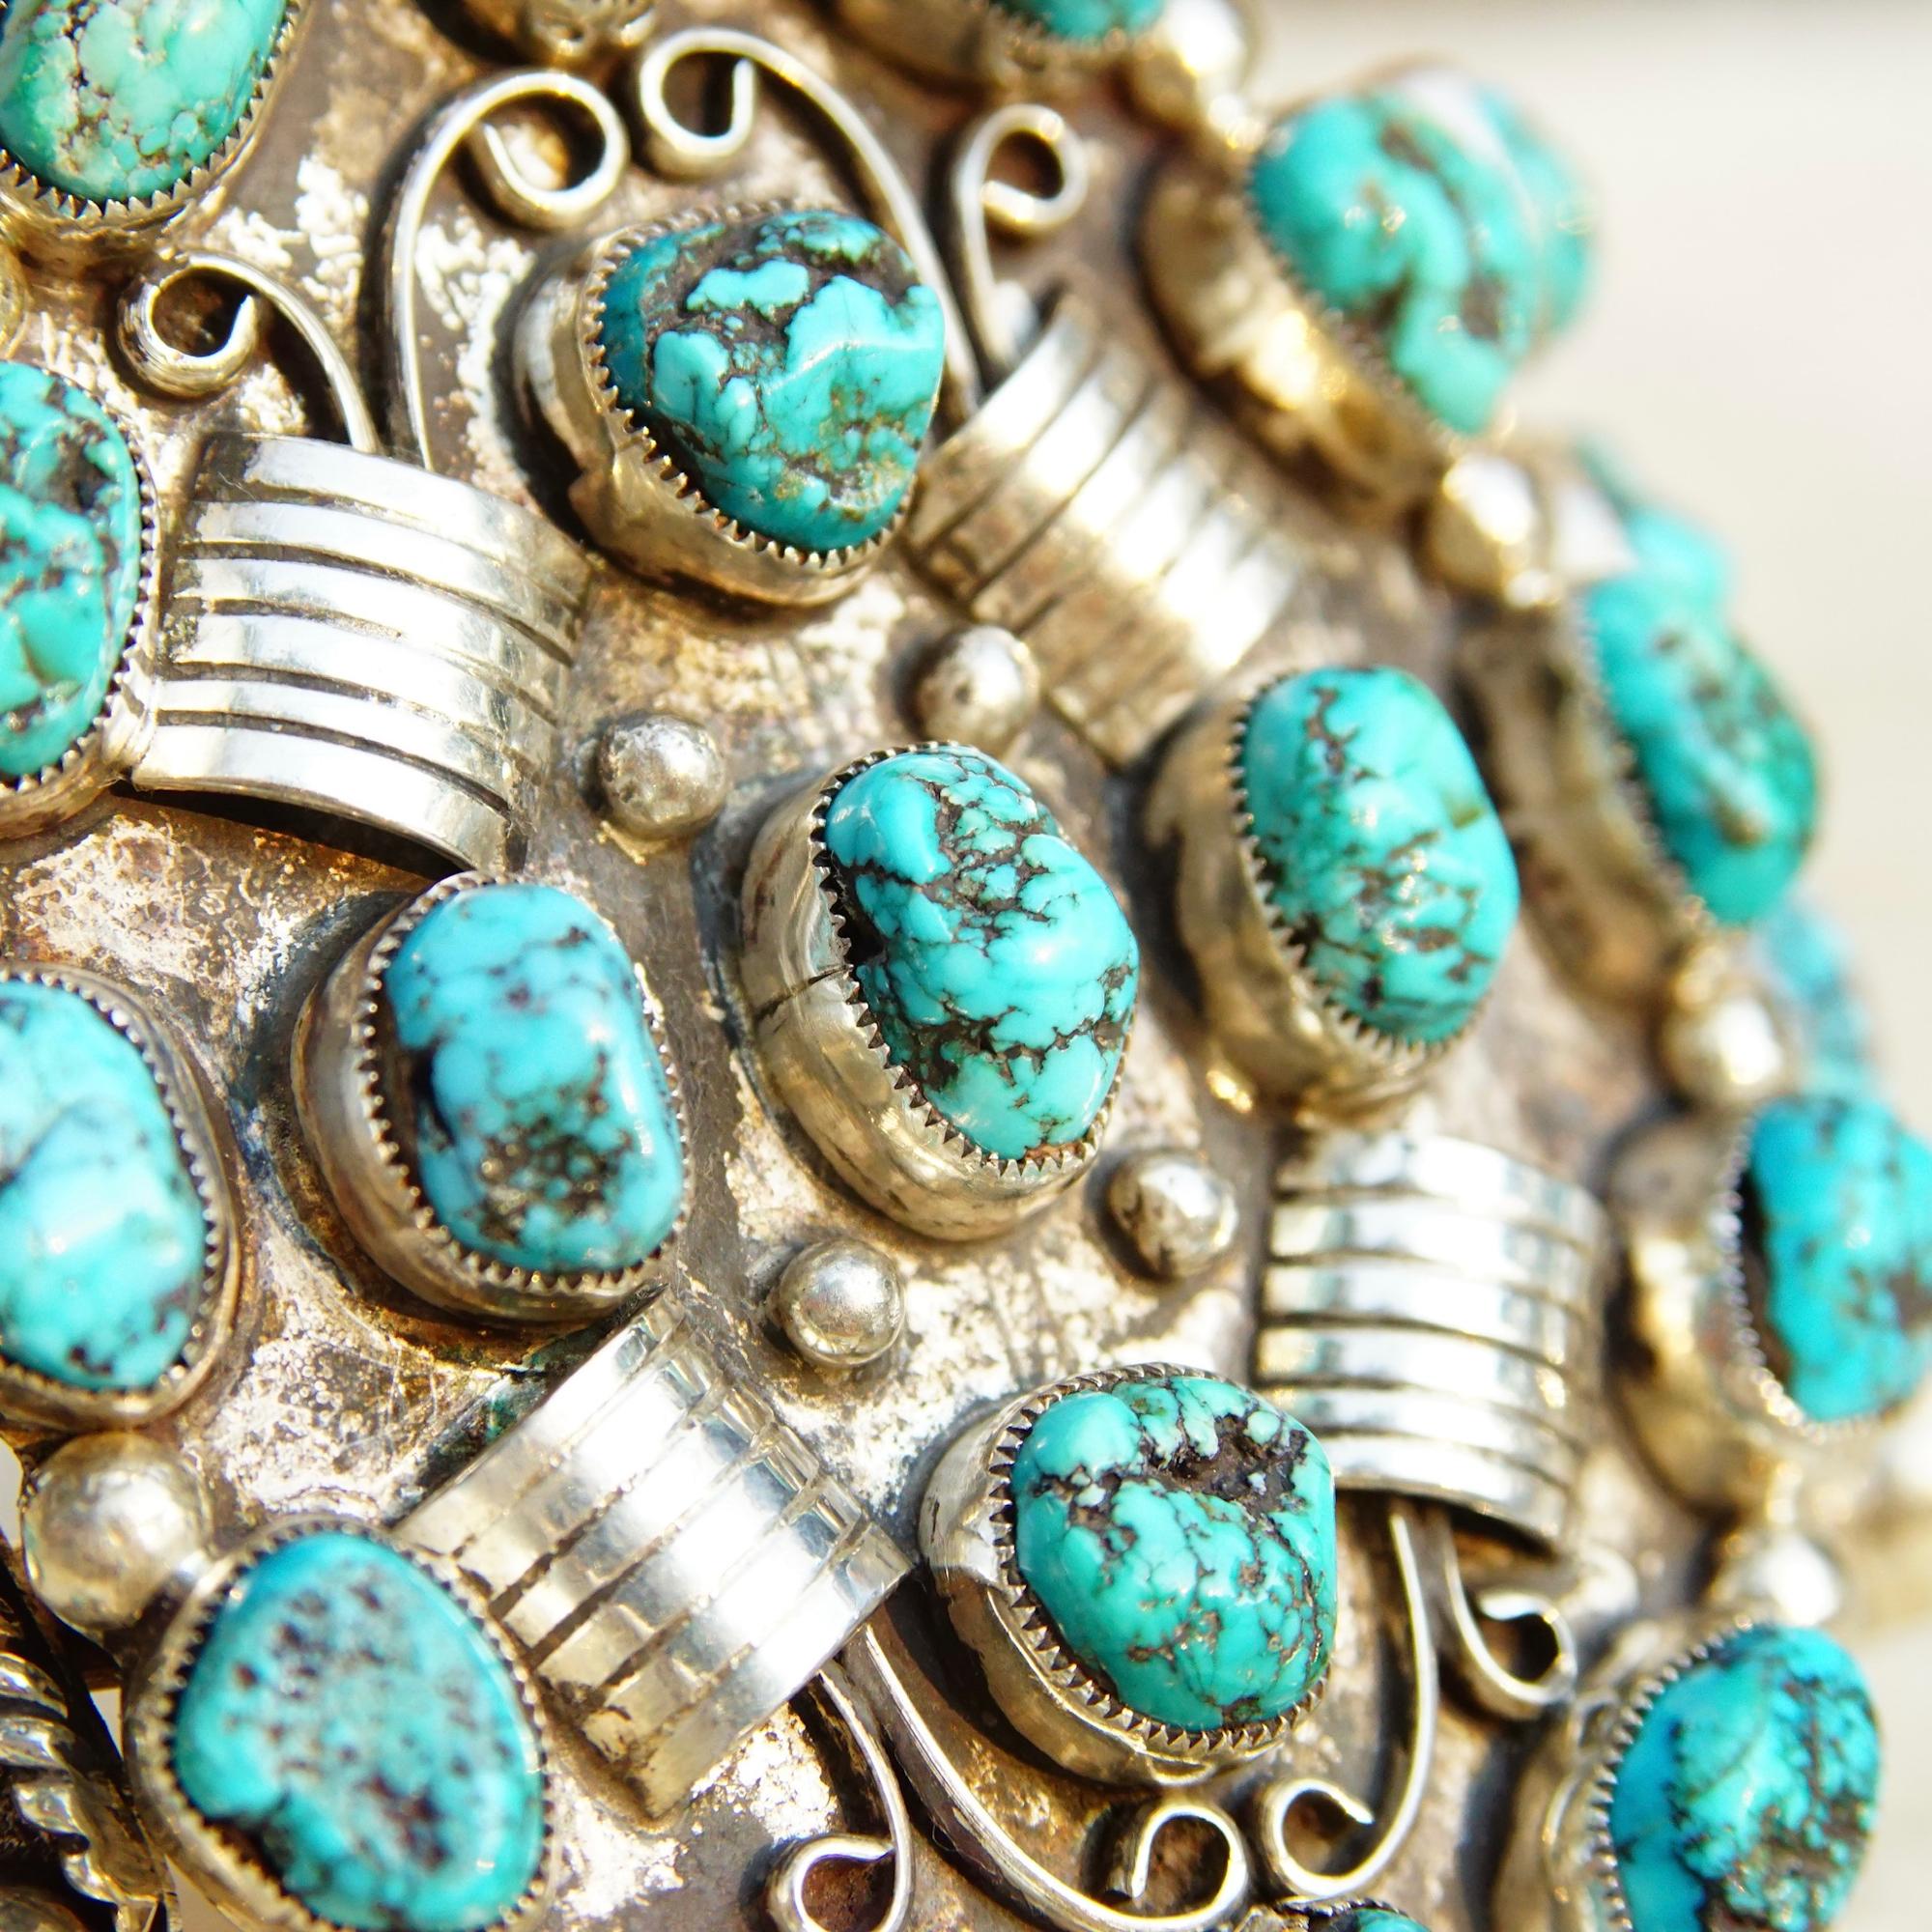 Pat Platero HUGE Navajo Sterling Silver Turquoise Cluster Cuff Bracelet In Good Condition For Sale In Philadelphia, PA